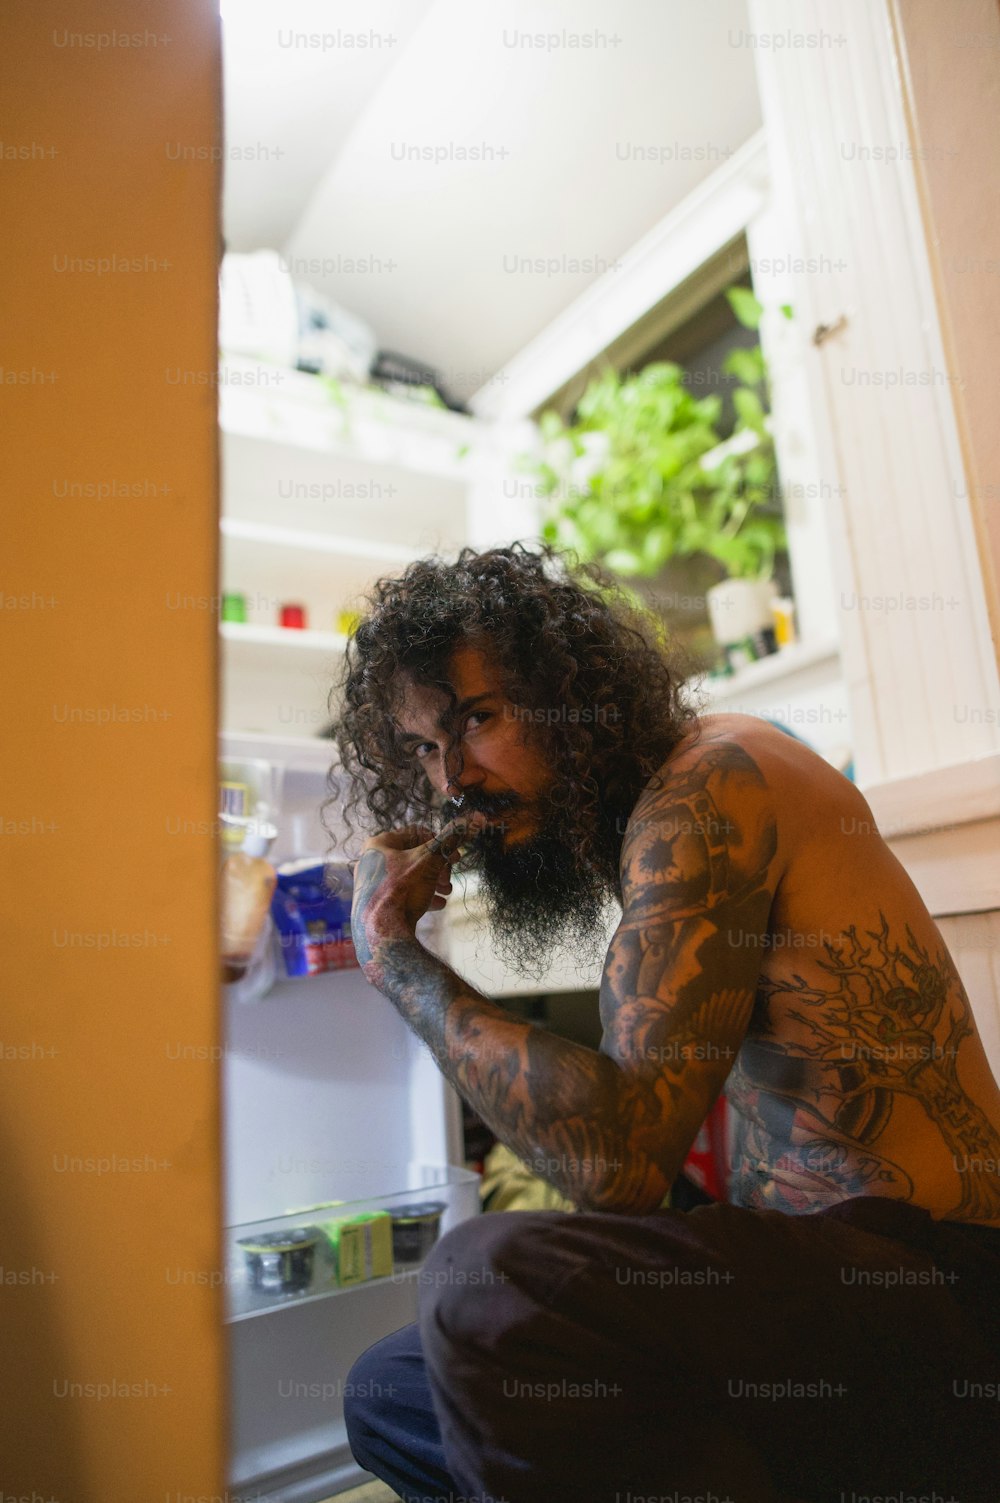 a man with long hair and tattoos sitting in front of a refrigerator